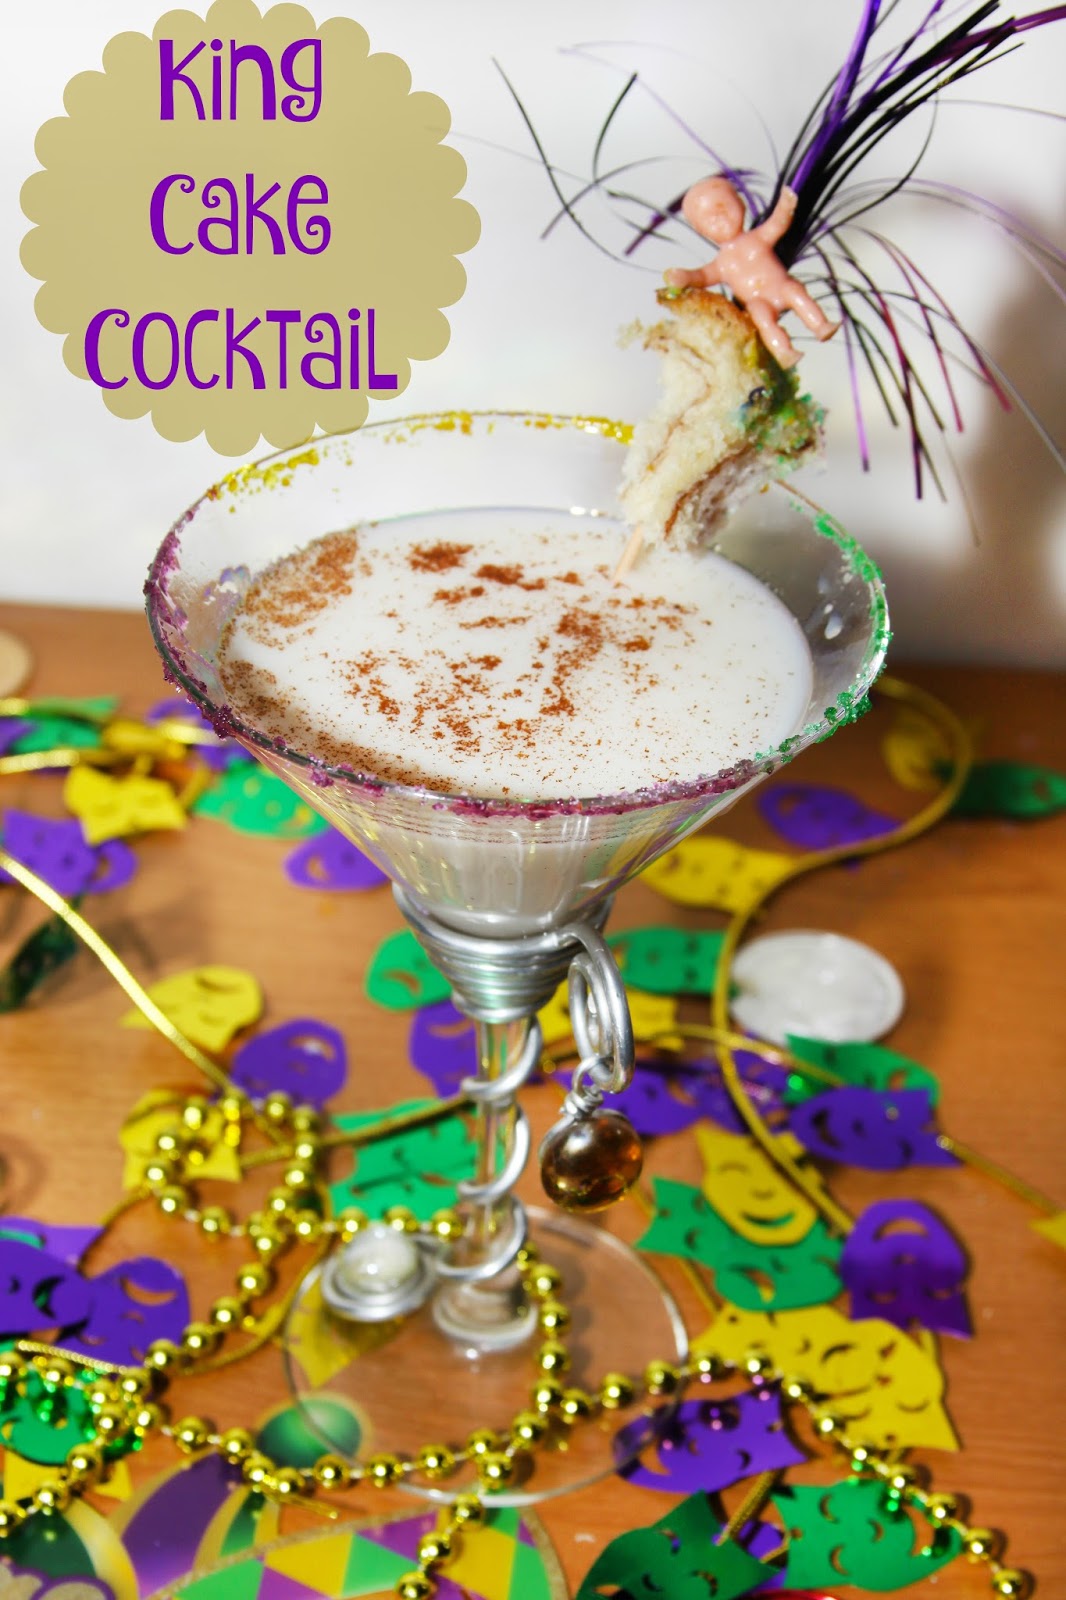 For the Love of Food: King Cake Cocktail for Fat Tuesday